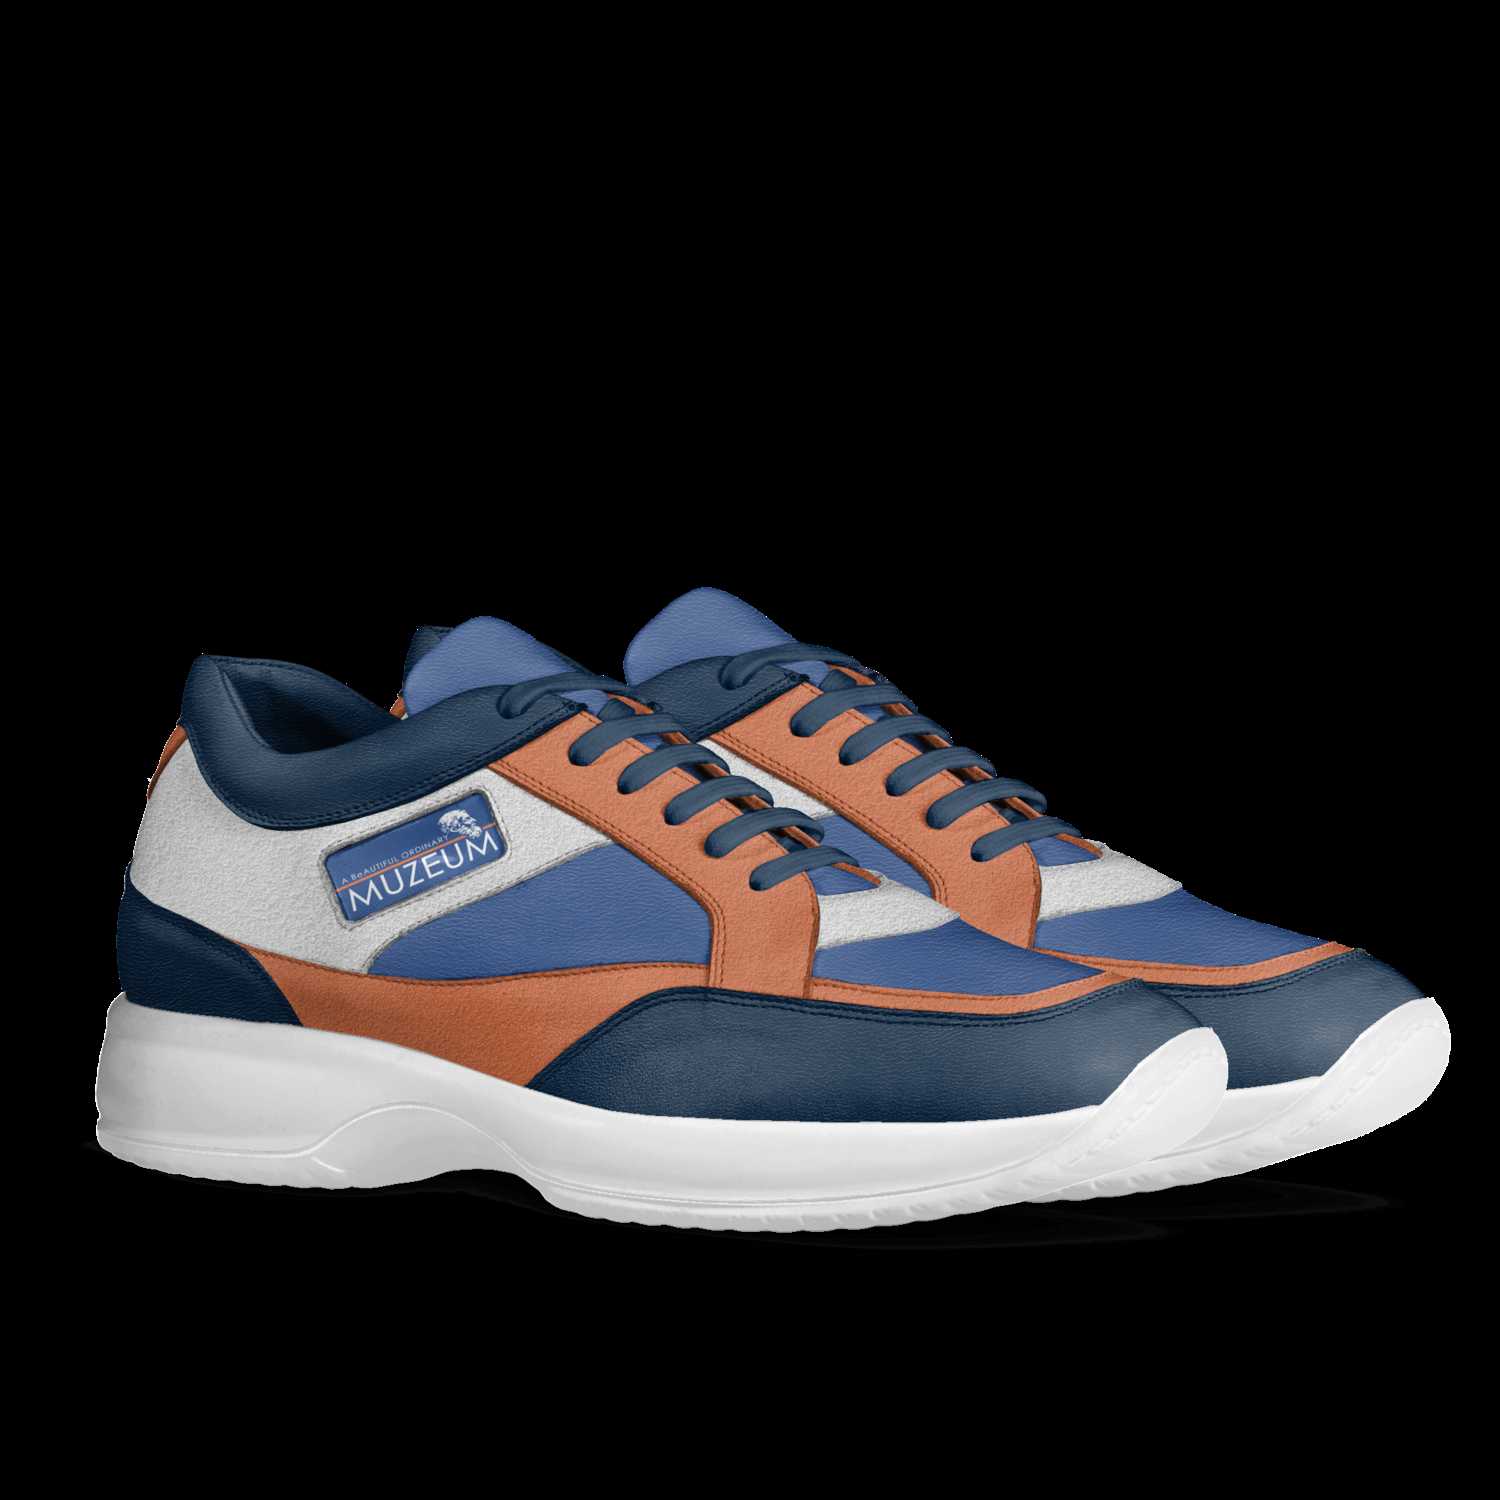 abo tennis shoes